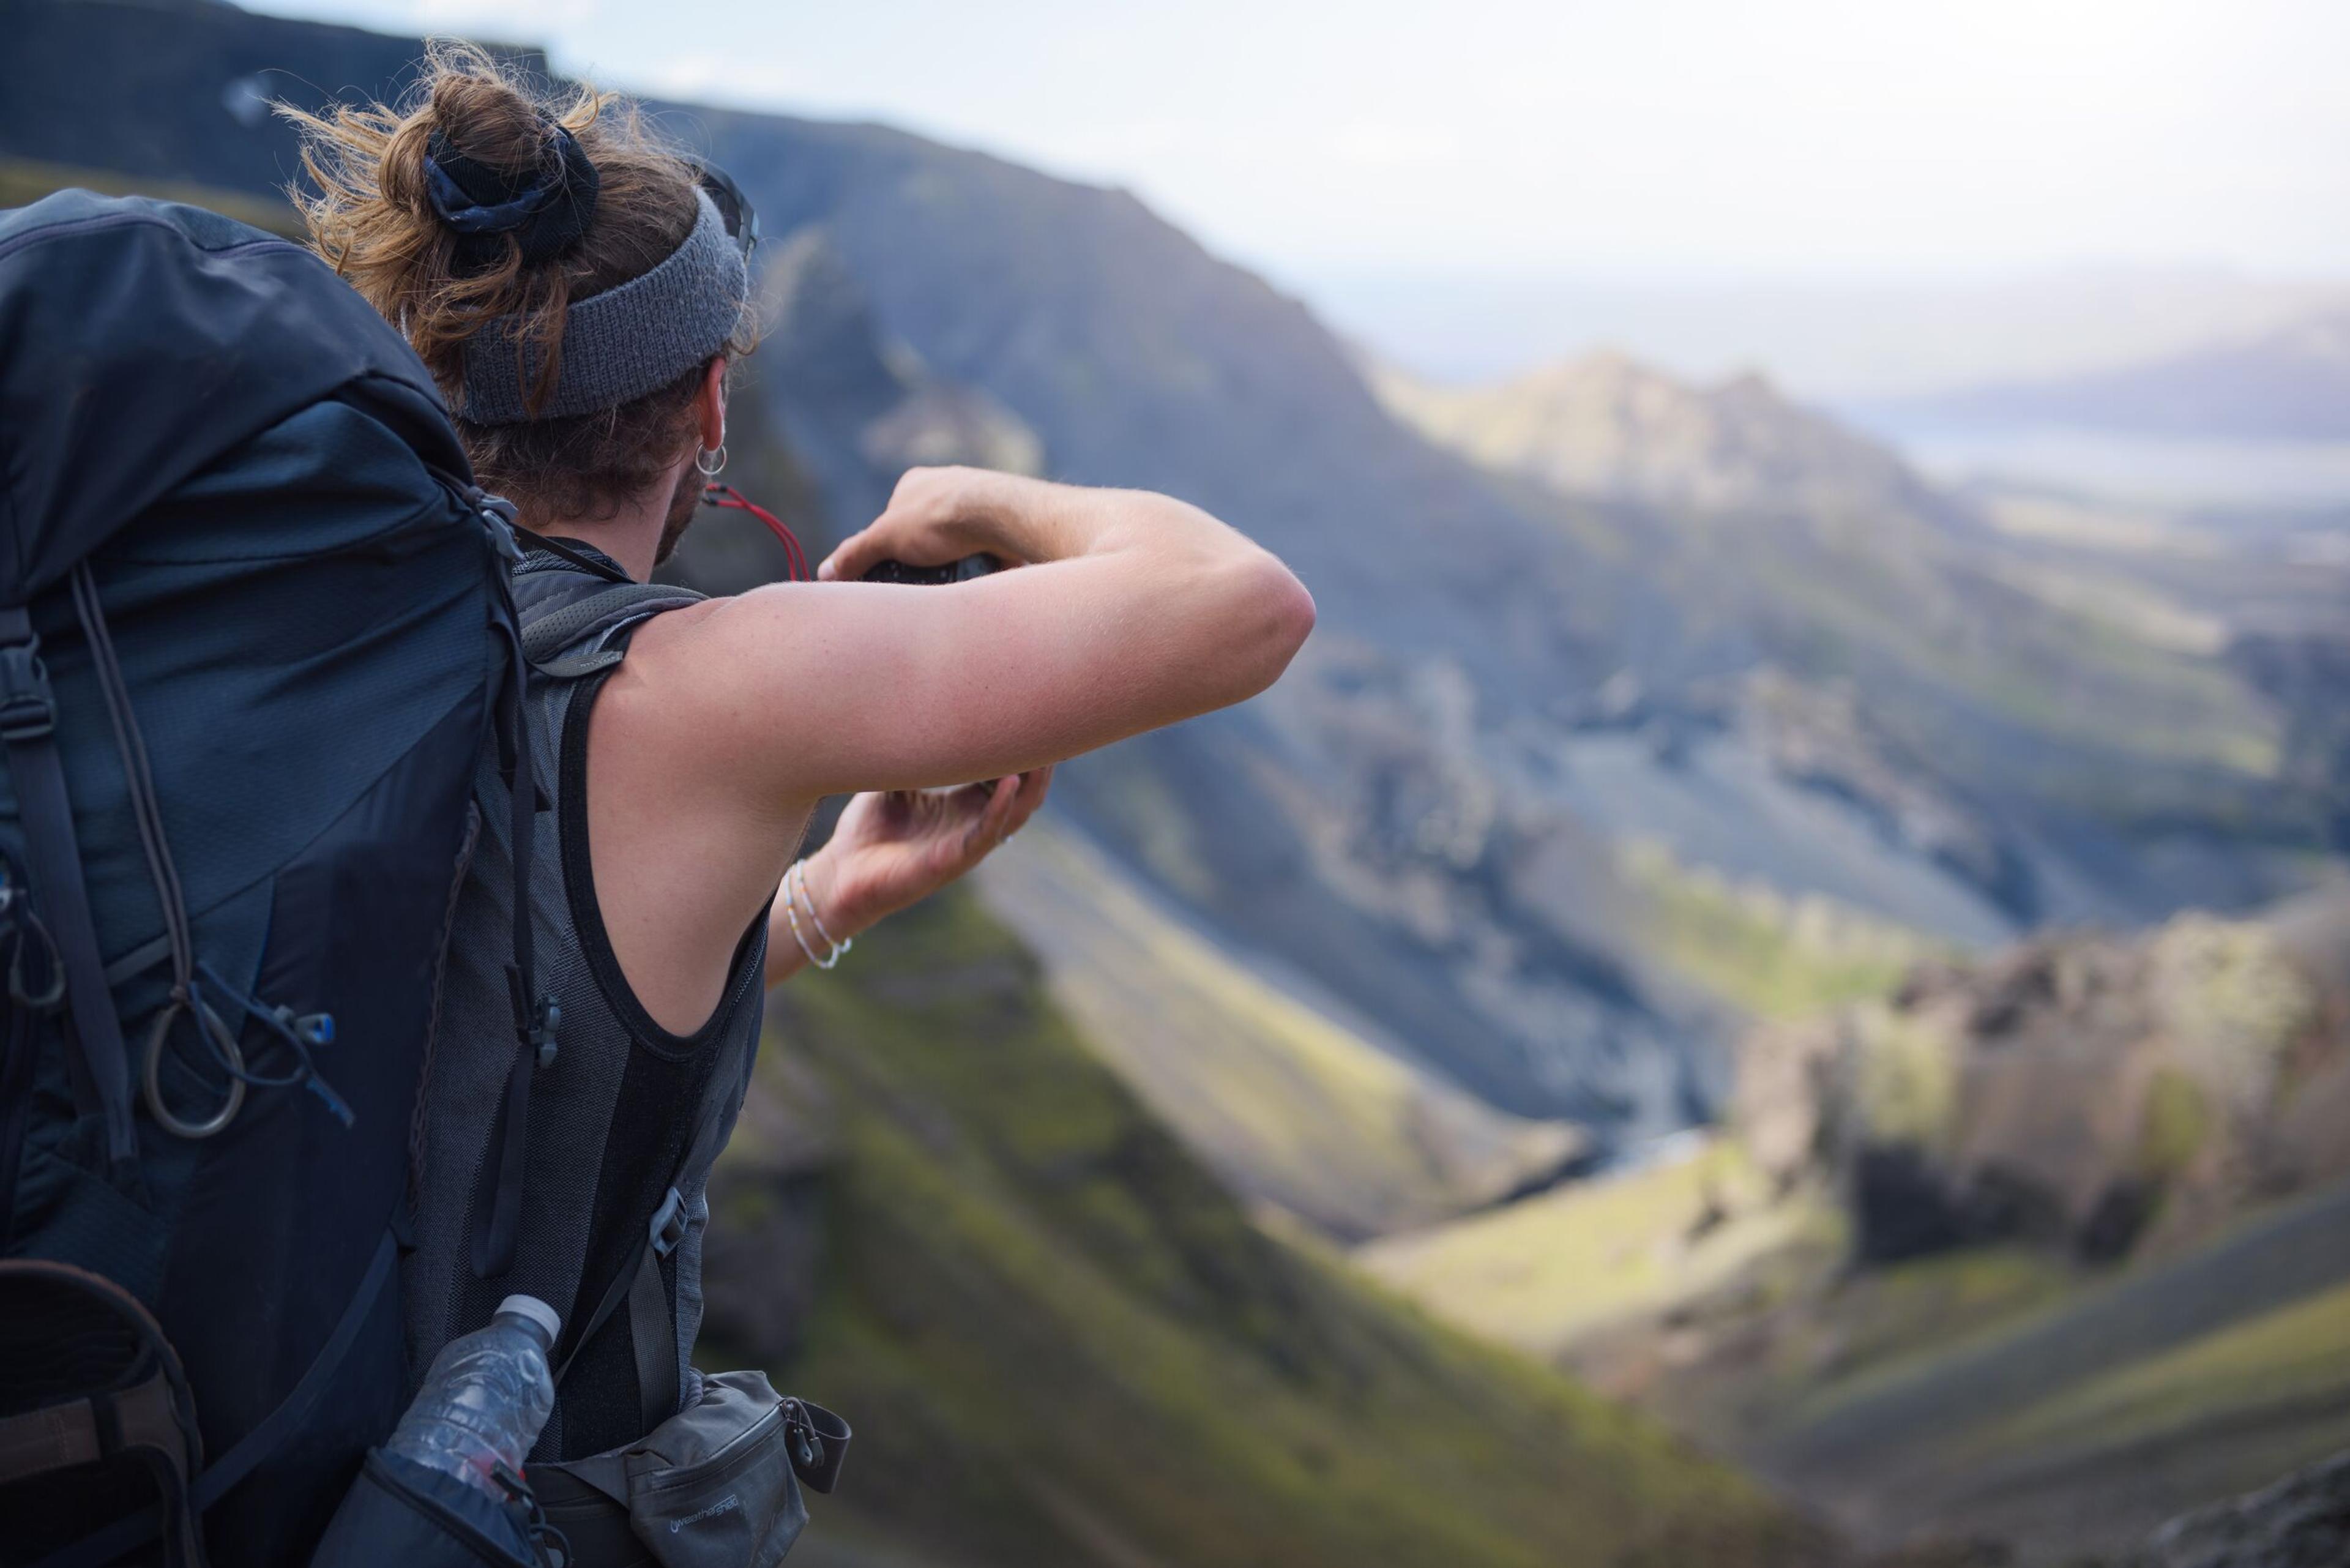 A hiker with a backpack looks out over a dramatic volcanic landscape, capturing the scene with a camera.